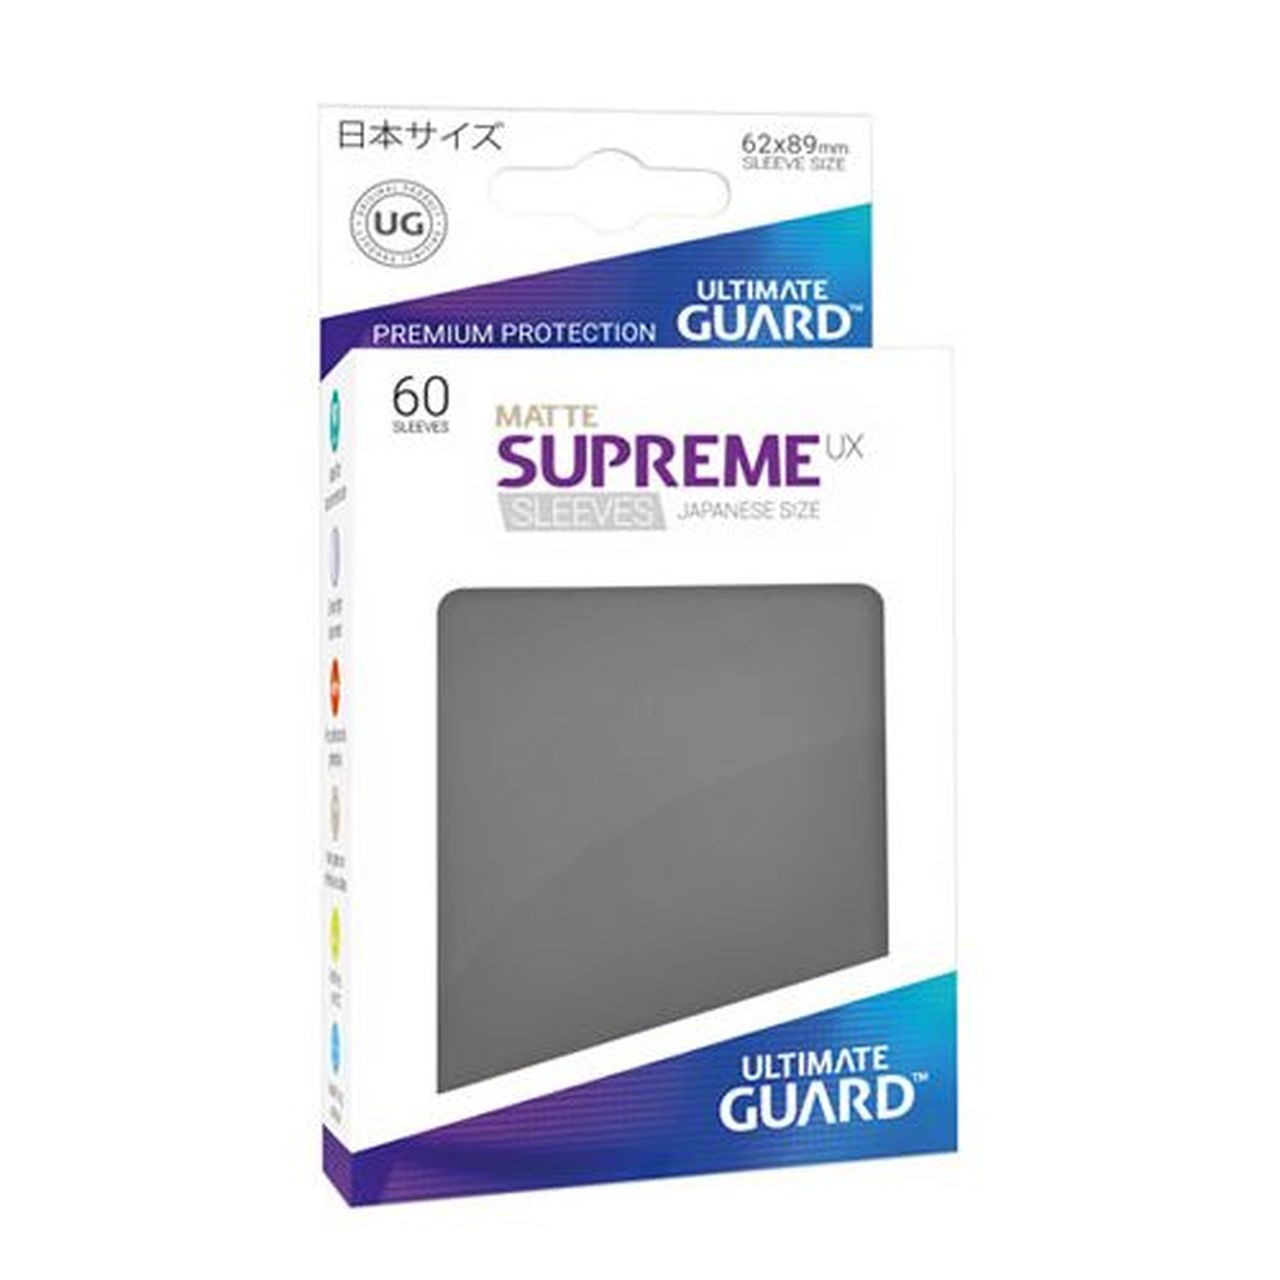 Supreme UX Japanese Size Sleeves - Matte Dark Grey (60) | All About Games